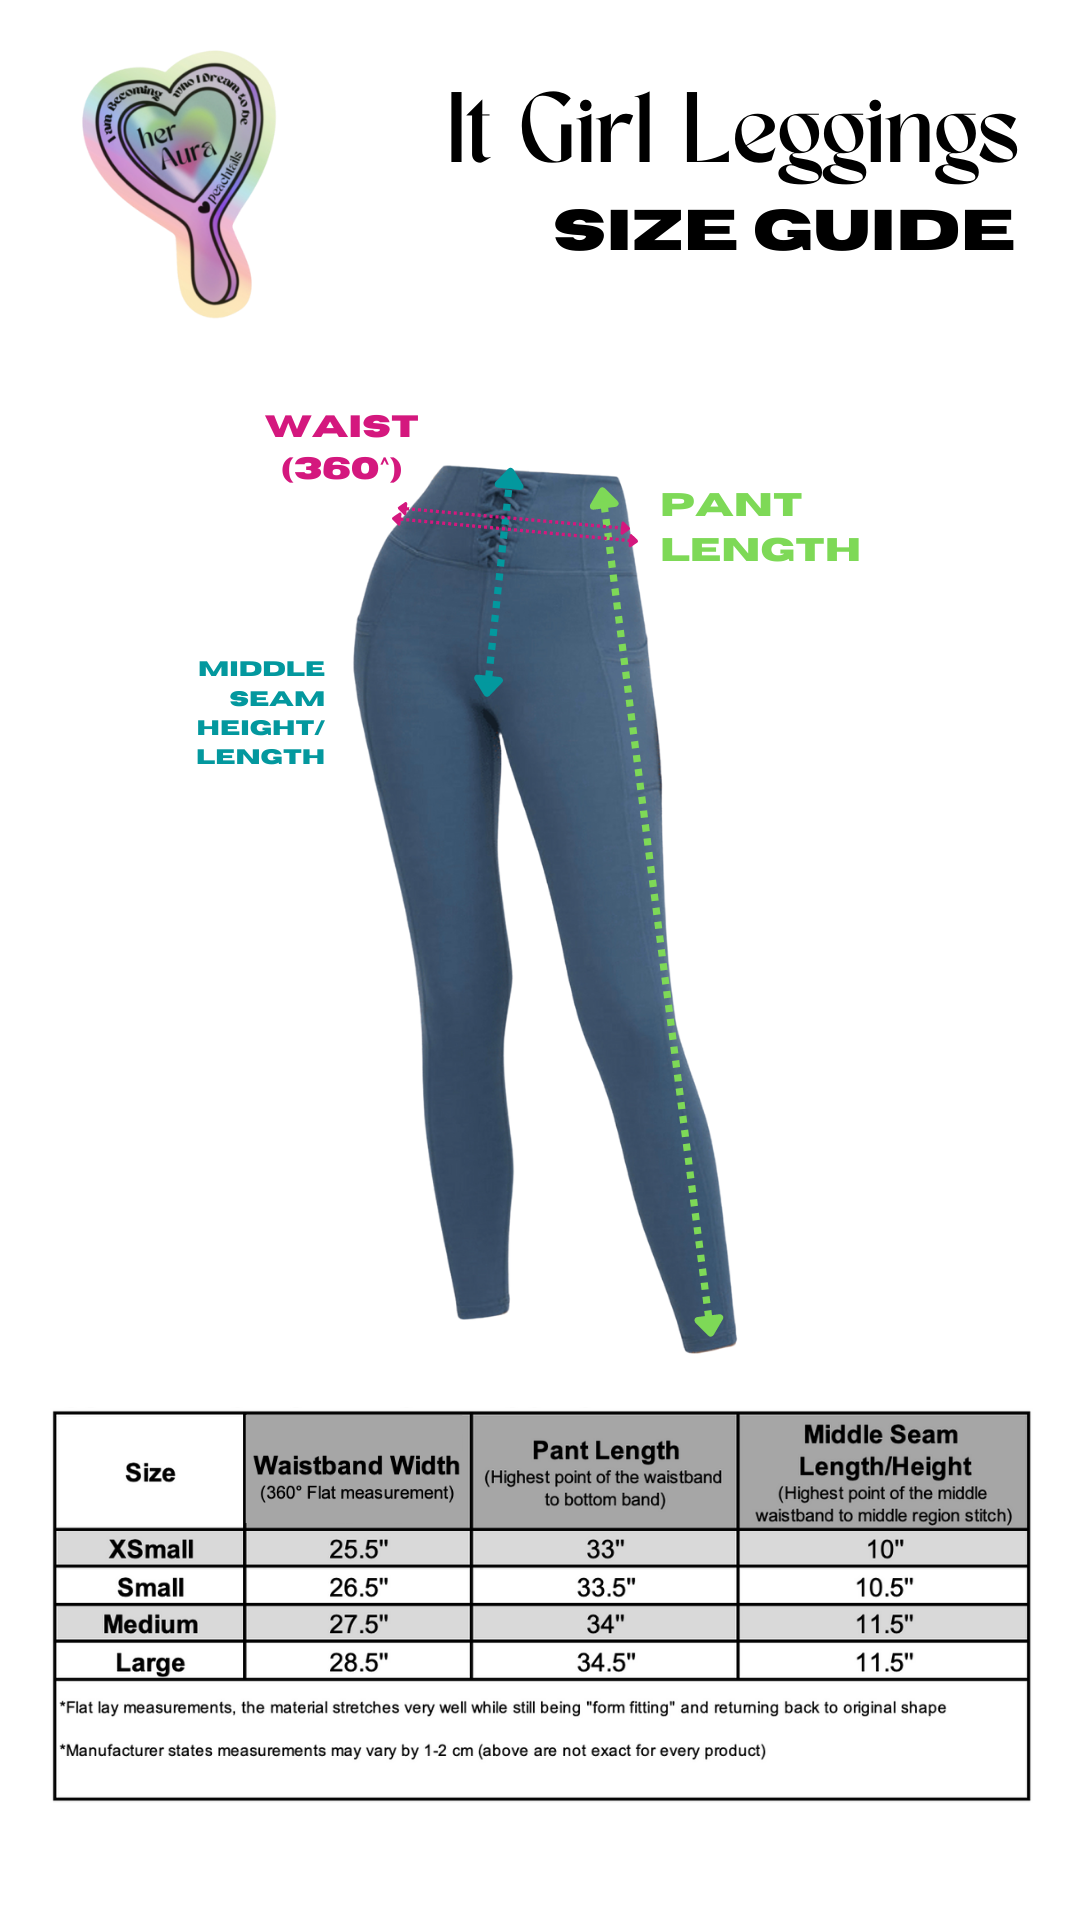 The image shows a size guide for "It Girl Leggings," detailing waistband width, pant length, and middle seam length for sizes XS through Large. The leggings are displayed on a mannequin, with dotted lines indicating measurement areas. The waistband width ranges from 25.5" to 28.5", pant length from 33" to 34.5", and middle seam length from 10" to 11.5". The note mentions that the material stretches well and returns to its original shape, with possible variations in measurements.